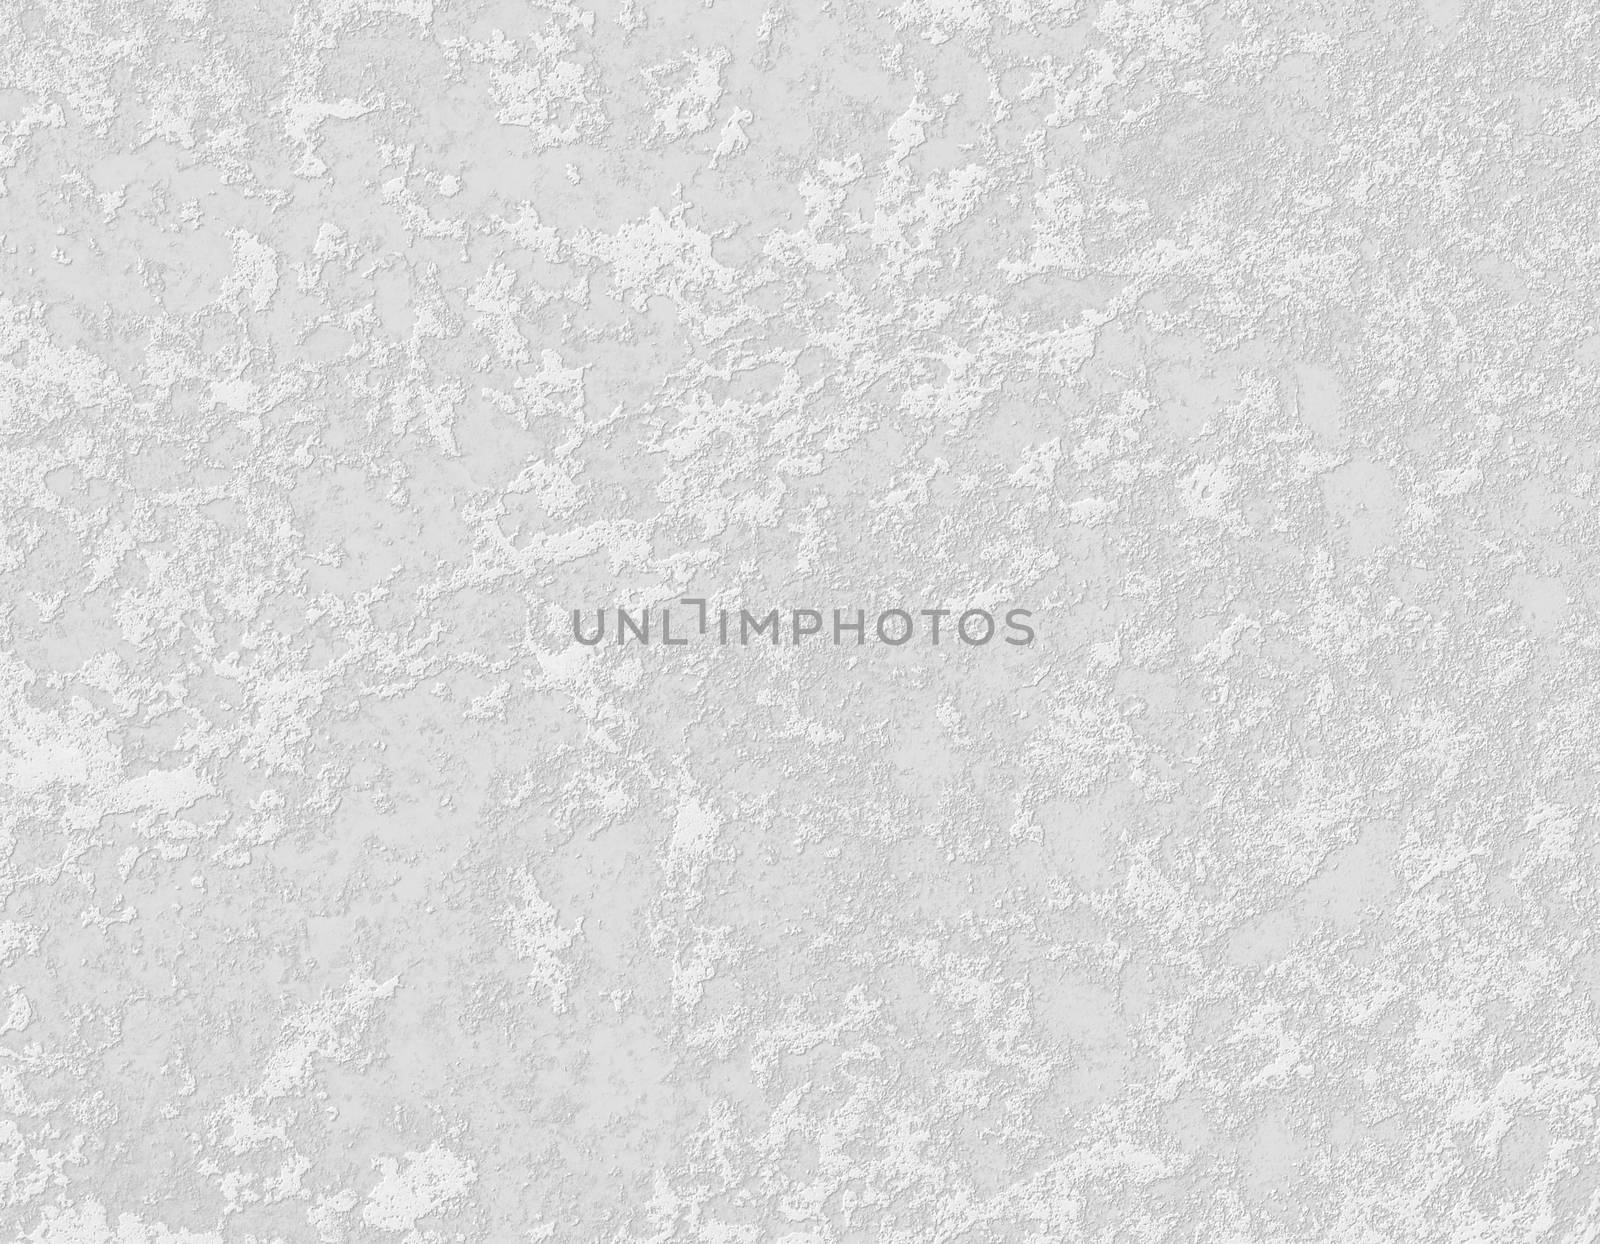 White and gray textures. Abstract gray background.